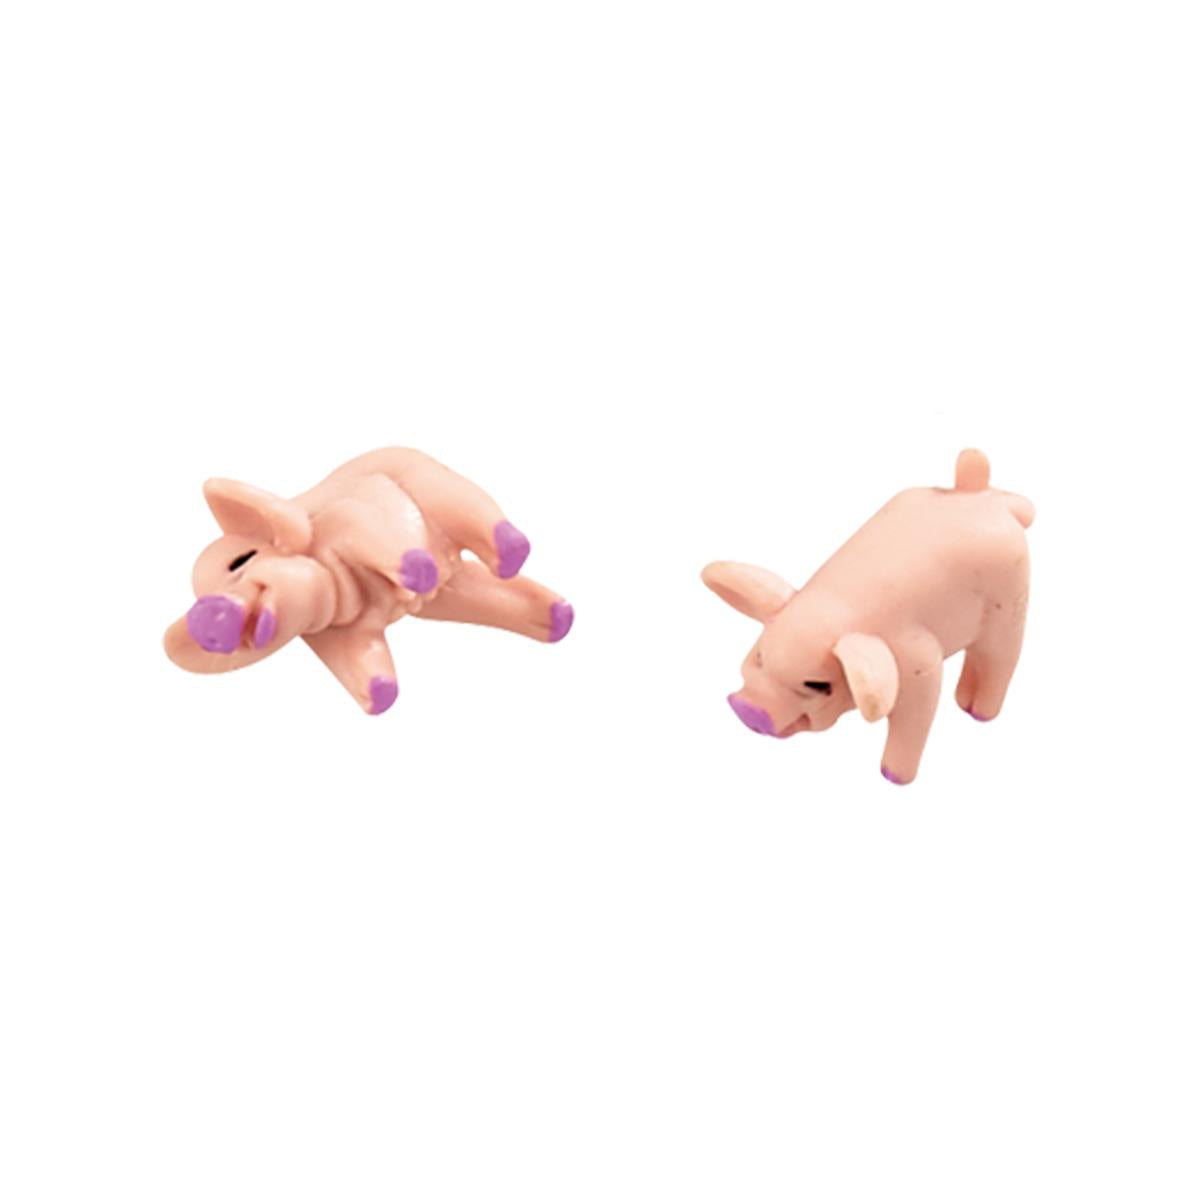 Pass the Pigs Dice Game